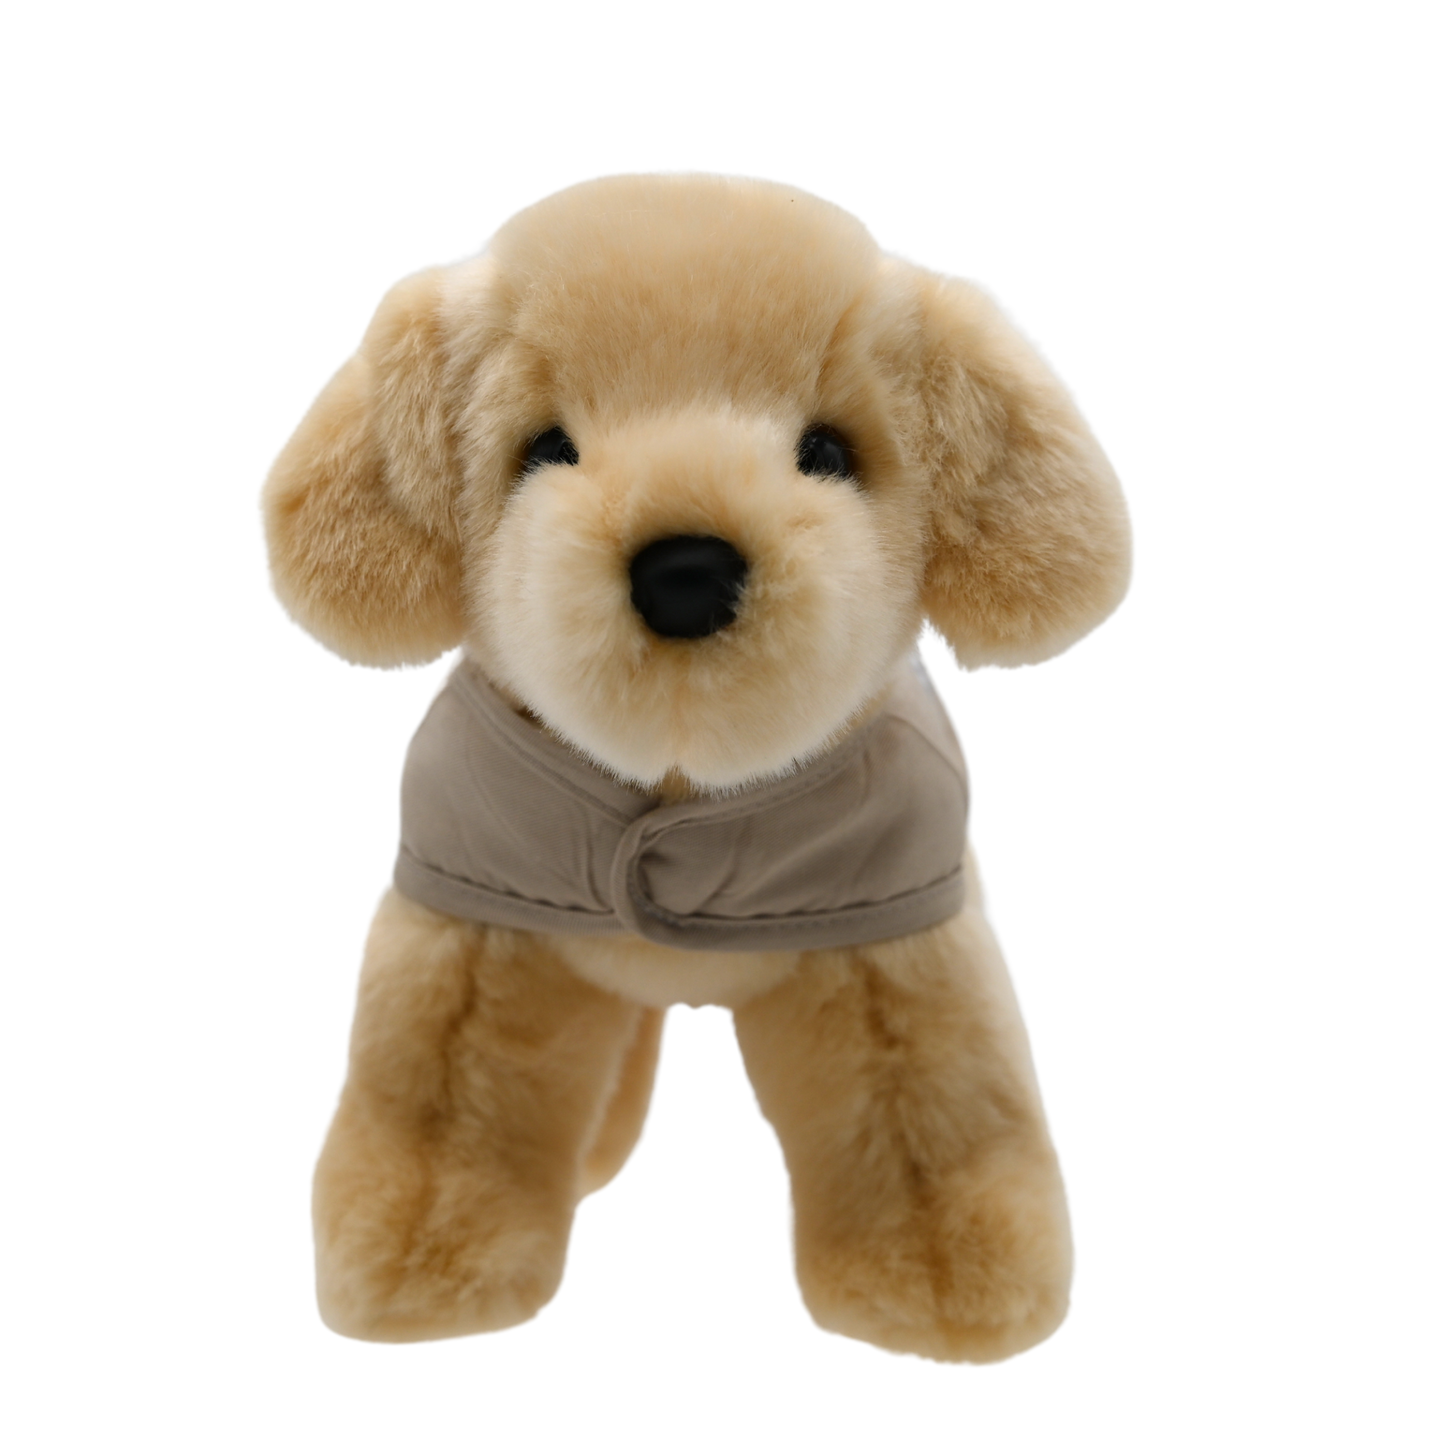 This 8-inch Yellow Labrador Plush Puppy, captured in the image, exudes charm with its lifelike features and soft golden fur. Wearing a tan vest proudly displaying the logos of America's VetDogs and the Guide Dog Foundation on either side, this adorable plush not only looks authentic but also supports these noble organizations. Its friendly expression and meticulous detailing make it a heartwarming addition to any collection.